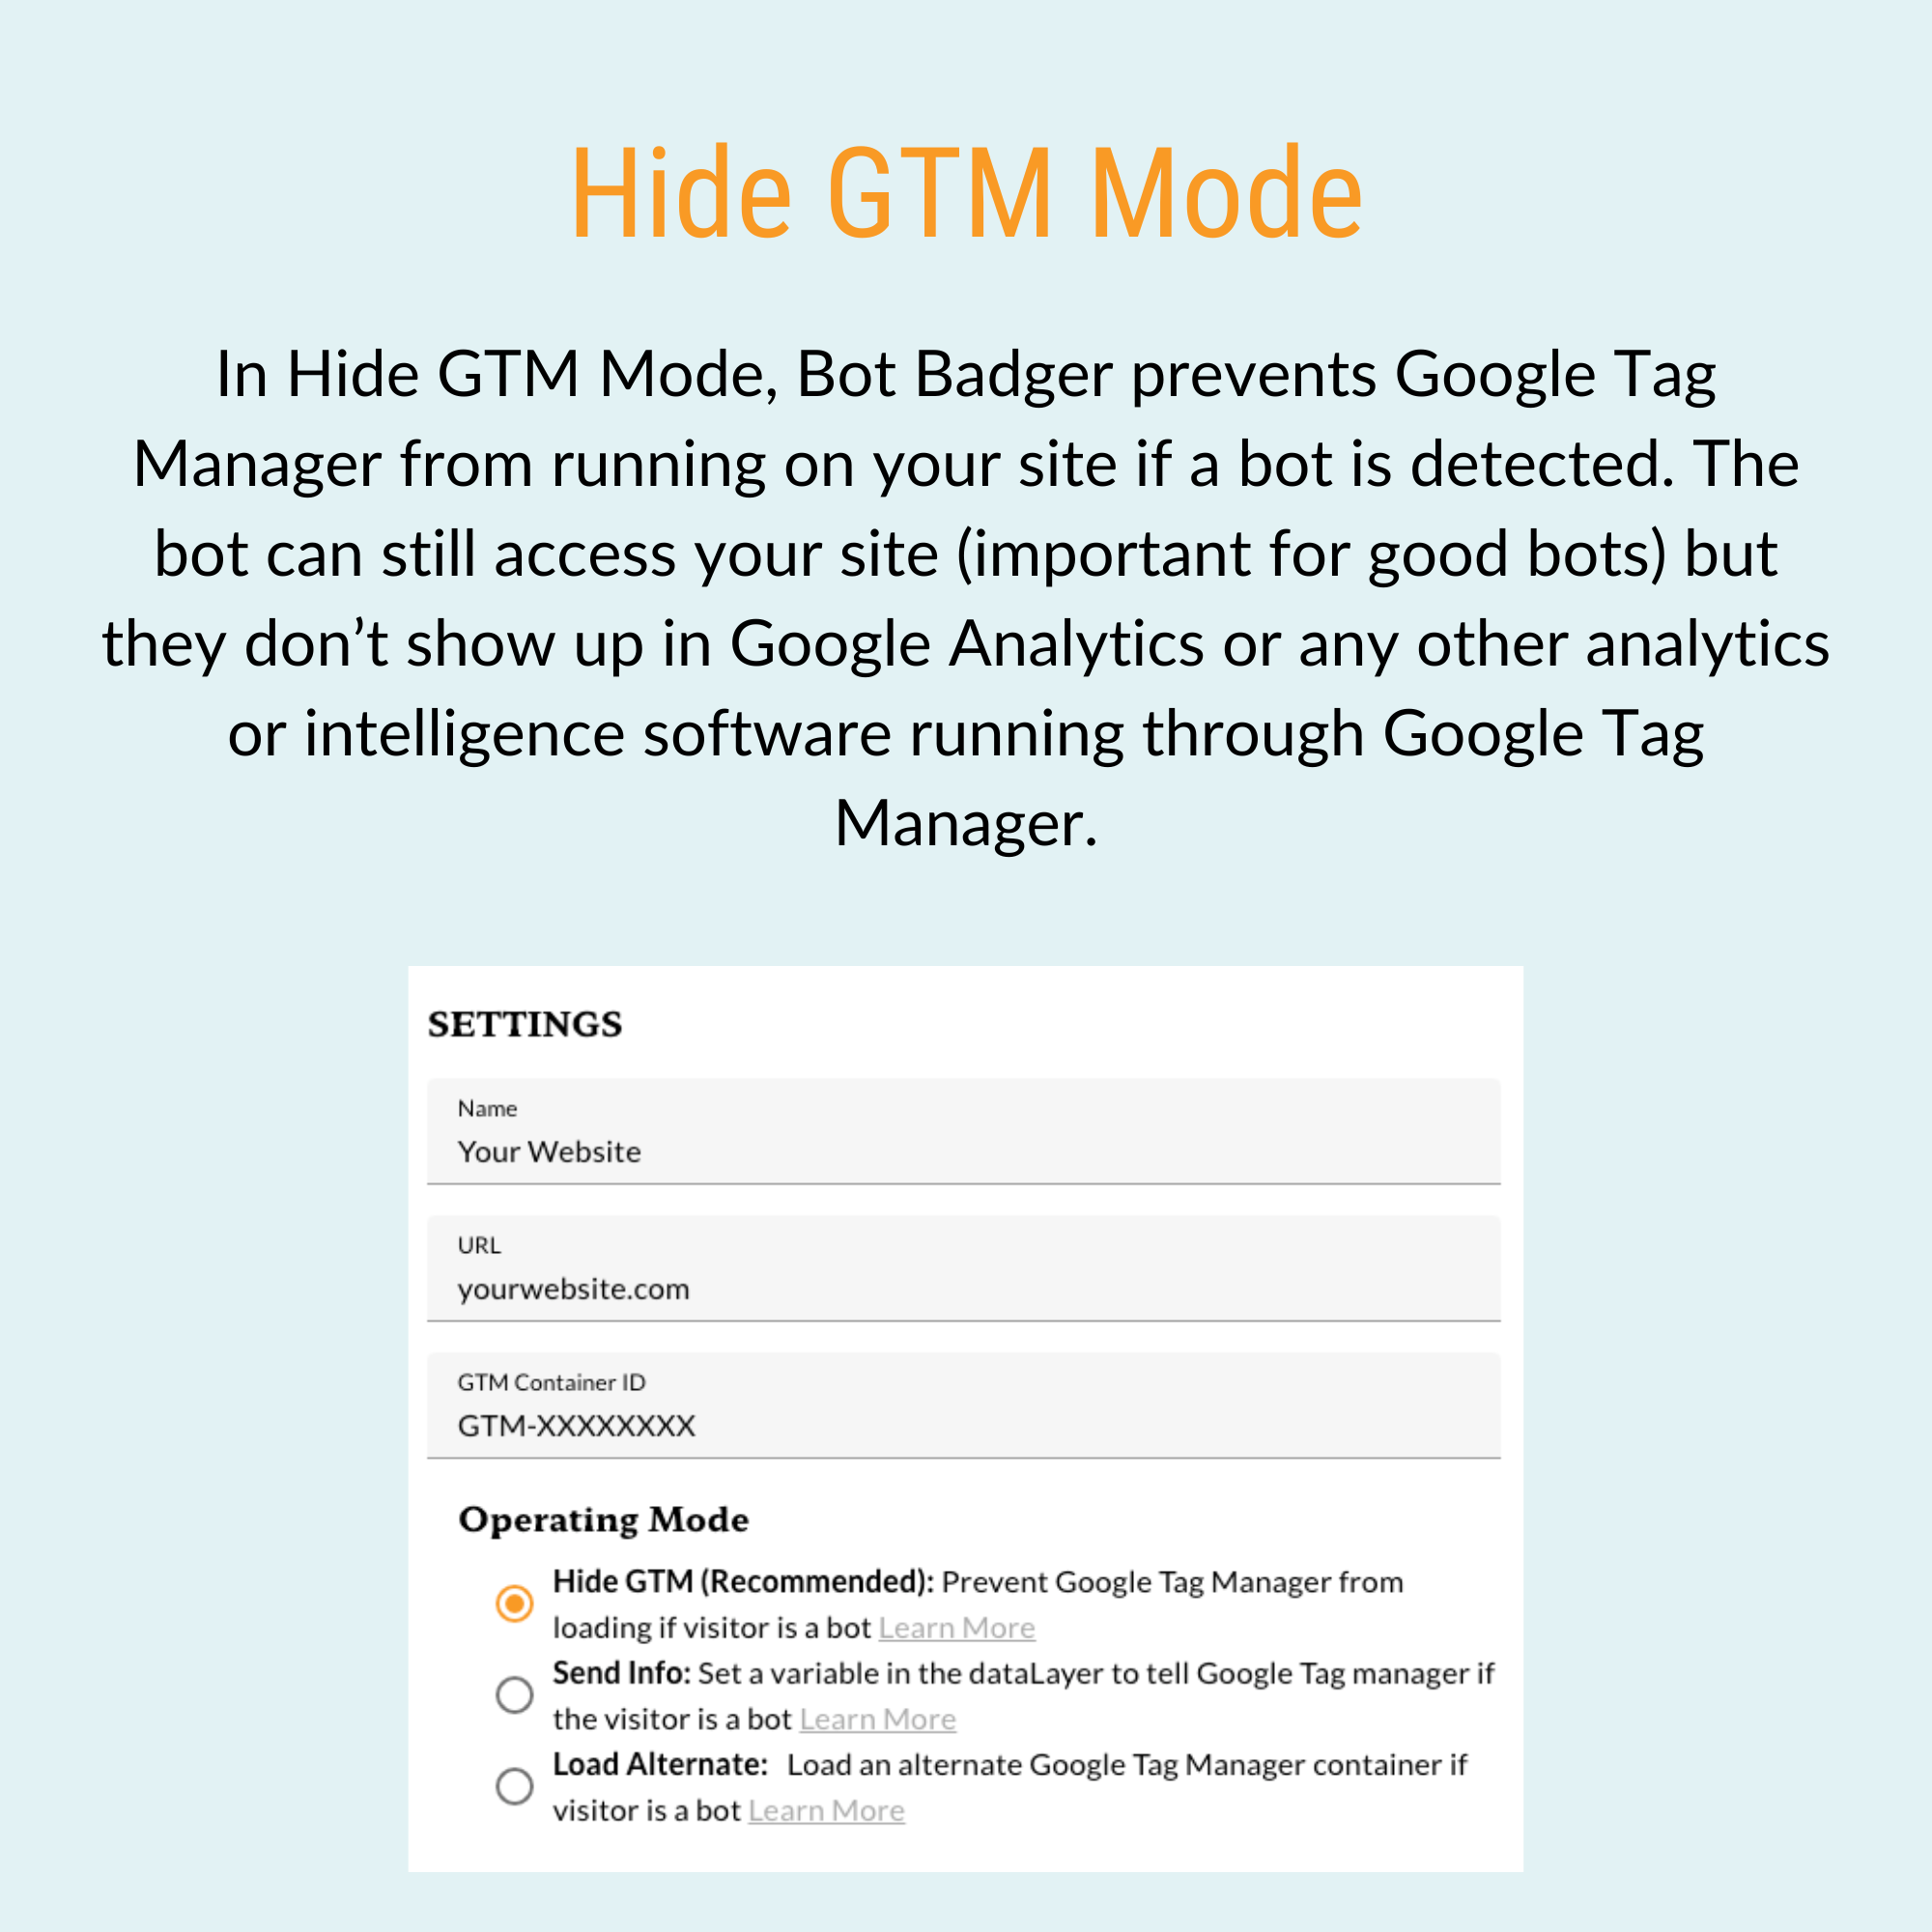 In its most popular mode, Hide GTM, Bot Badger allows bots to access your site without affecting analytics by preventing Google Tag Manager from executing, ensuring only genuine user data is captured.